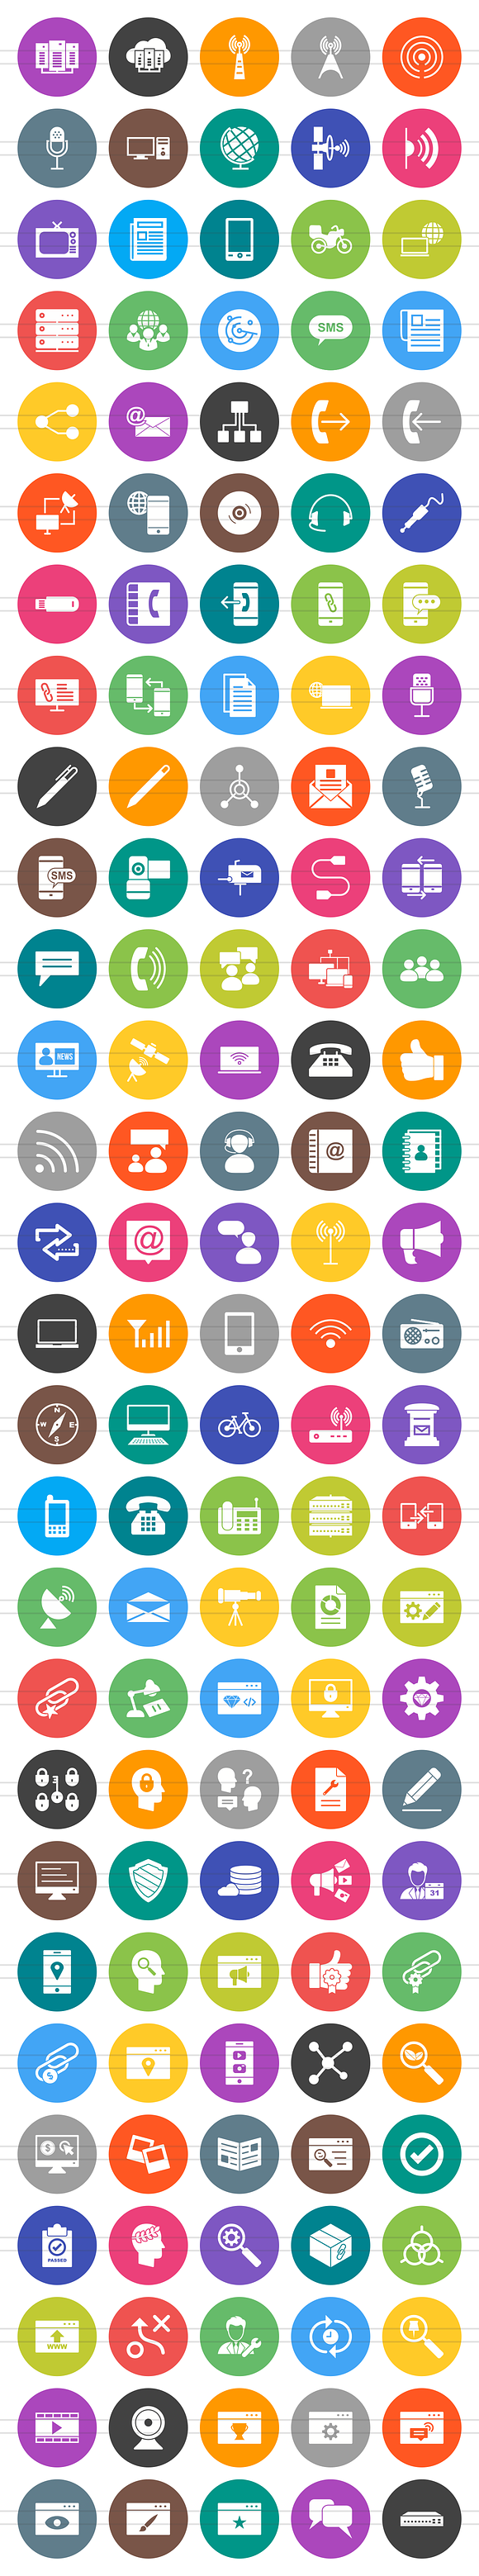 140 IT & Communication Filled Icons in Icons - product preview 1